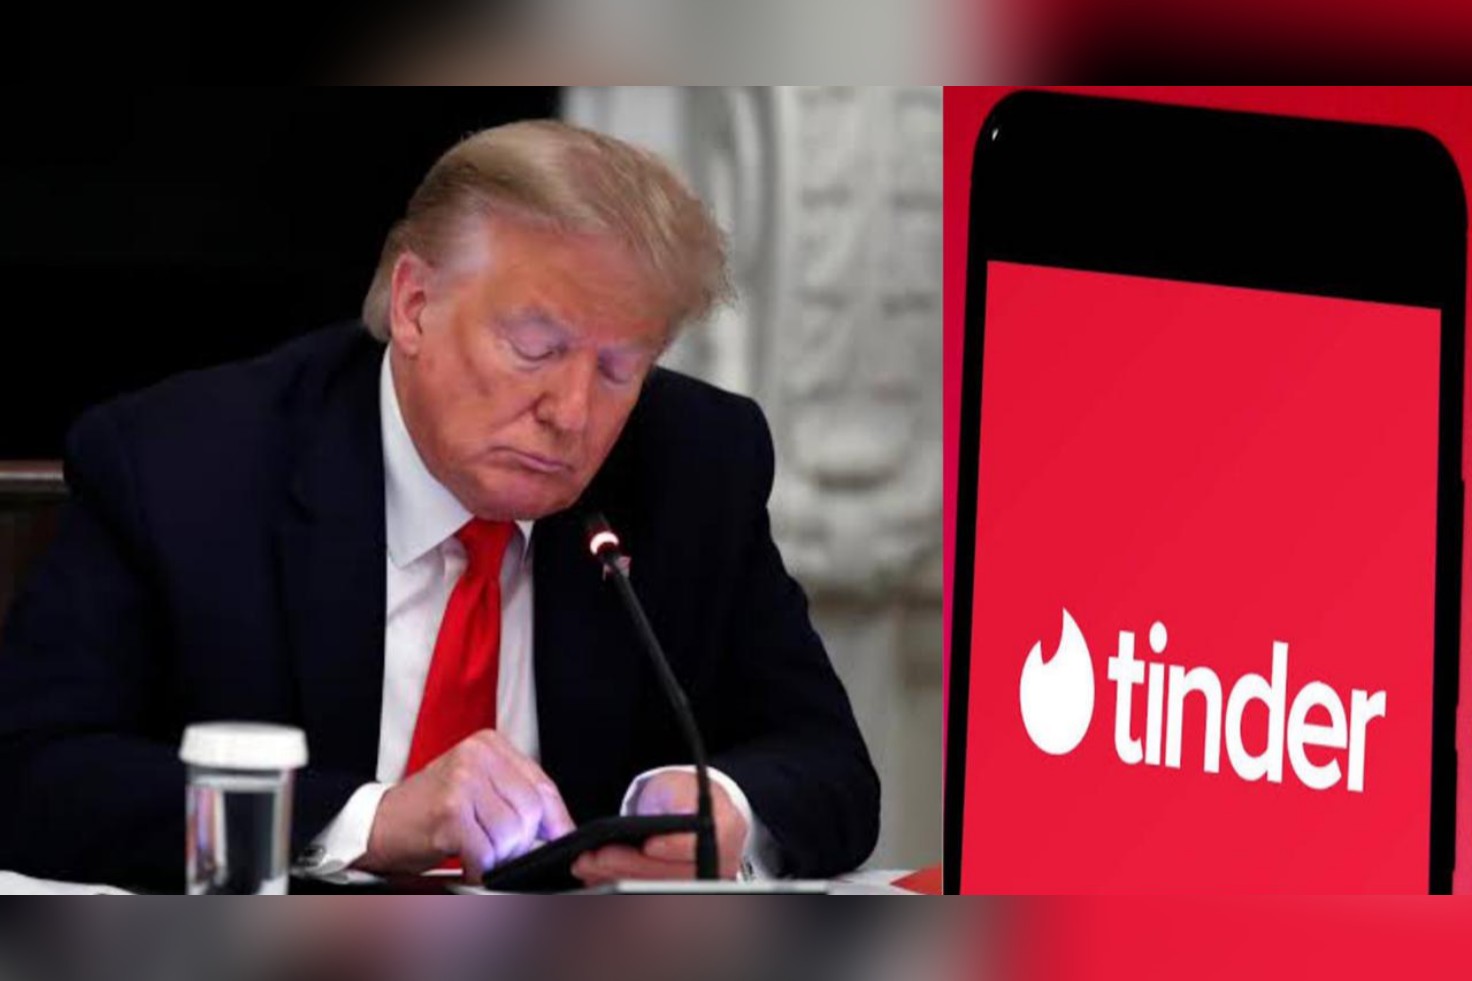 Donald Trump Joins Tinder, After Getting Banned On Twitter, Instagram, Facebook And Snapchat